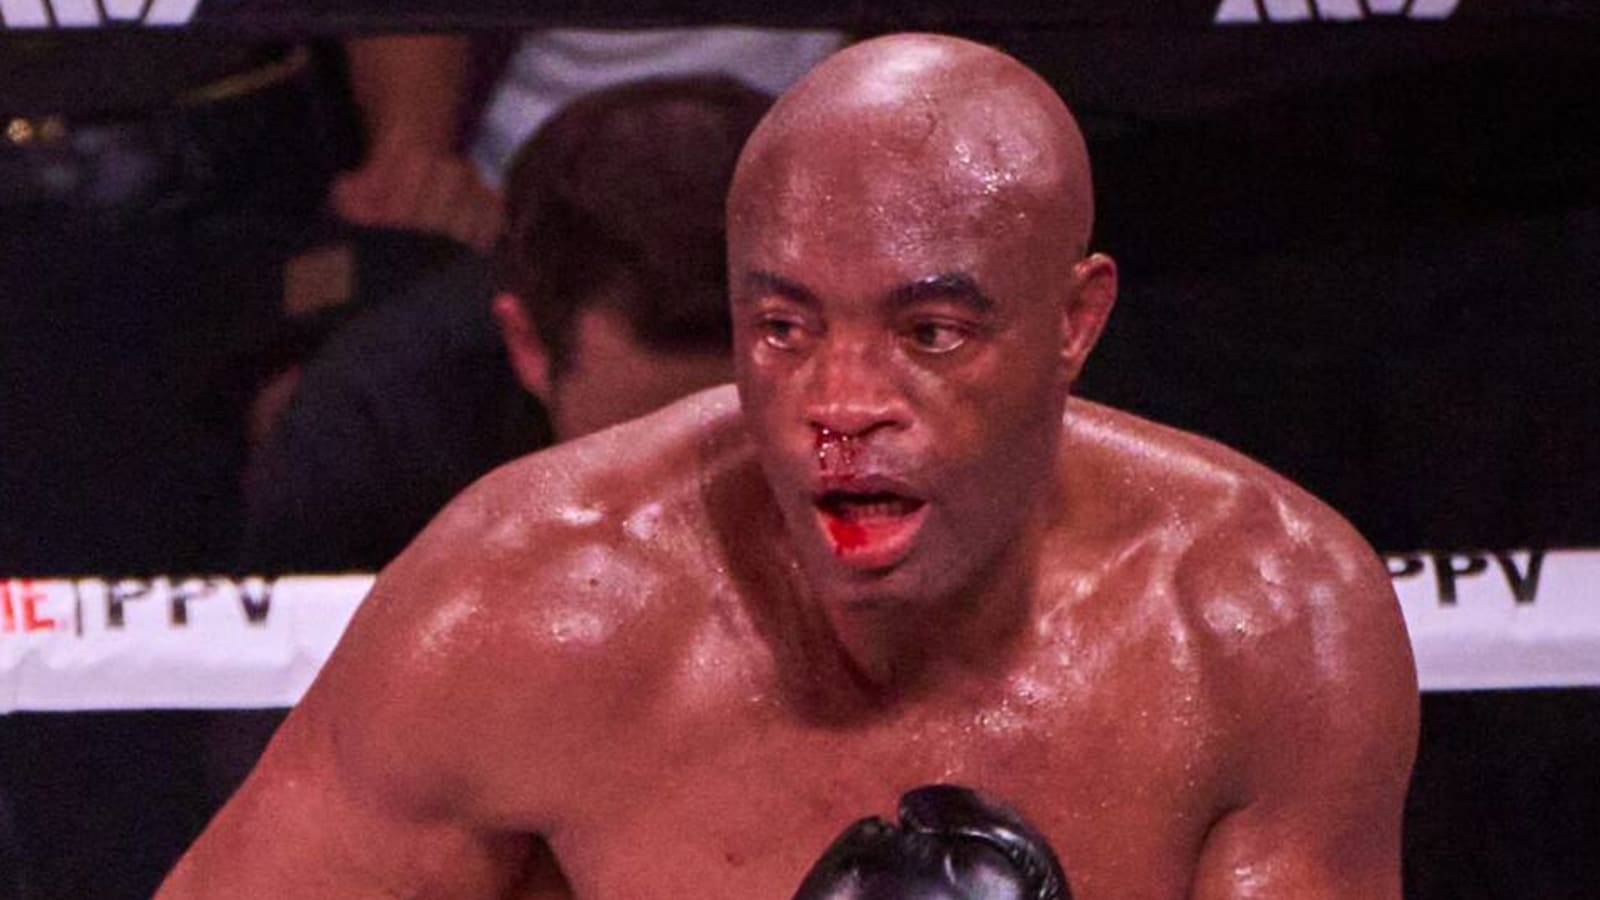 Anderson Silva Farewell Fight to Be Contested Under Boxing Rules in Sao Paulo on June 15